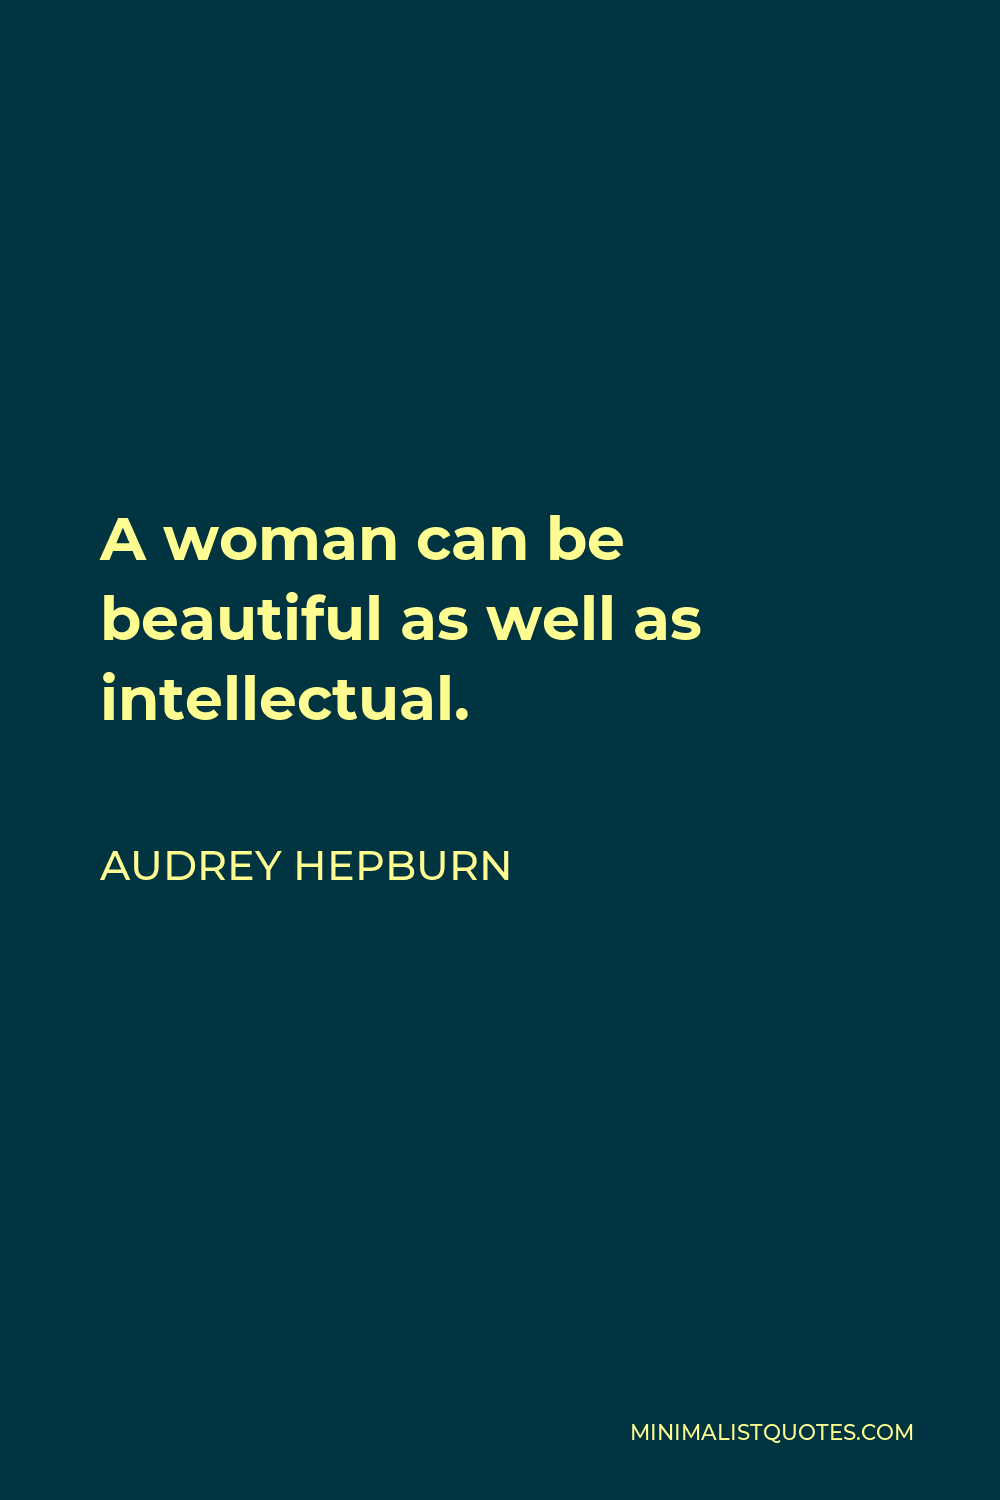 Audrey Hepburn Quote - A woman can be beautiful as well as intellectual.